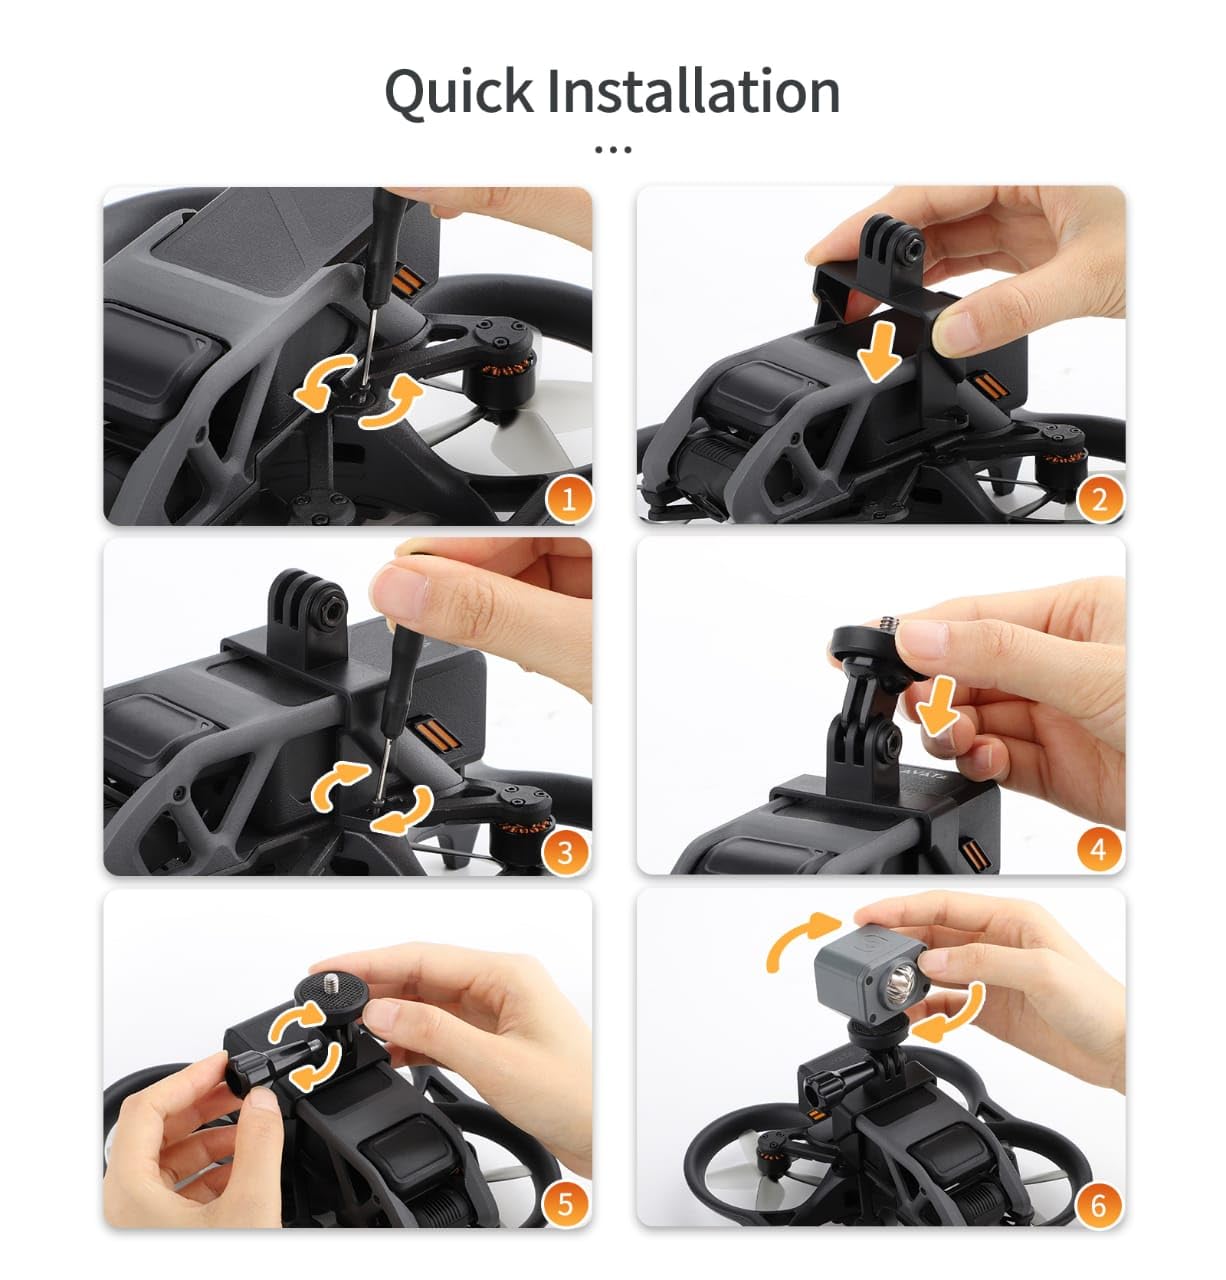 Action Camera Holder For Dji Avata Can Mount Insta 360/ Go Pro/Action 2/3/ Osmo Pocket Lights Etc Mount Accessories